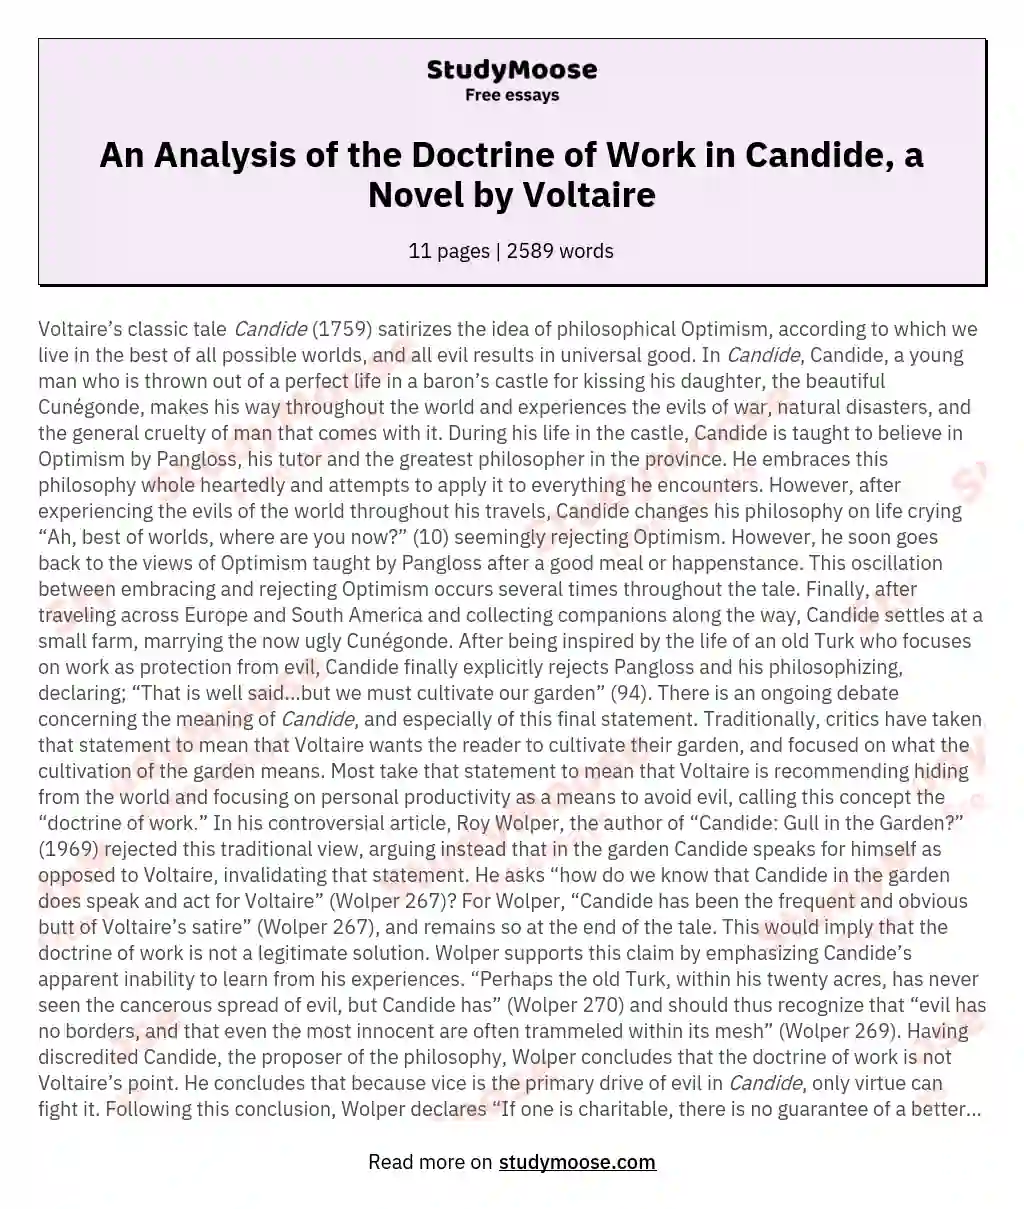 An Analysis of the Doctrine of Work in Candide, a Novel by Voltaire